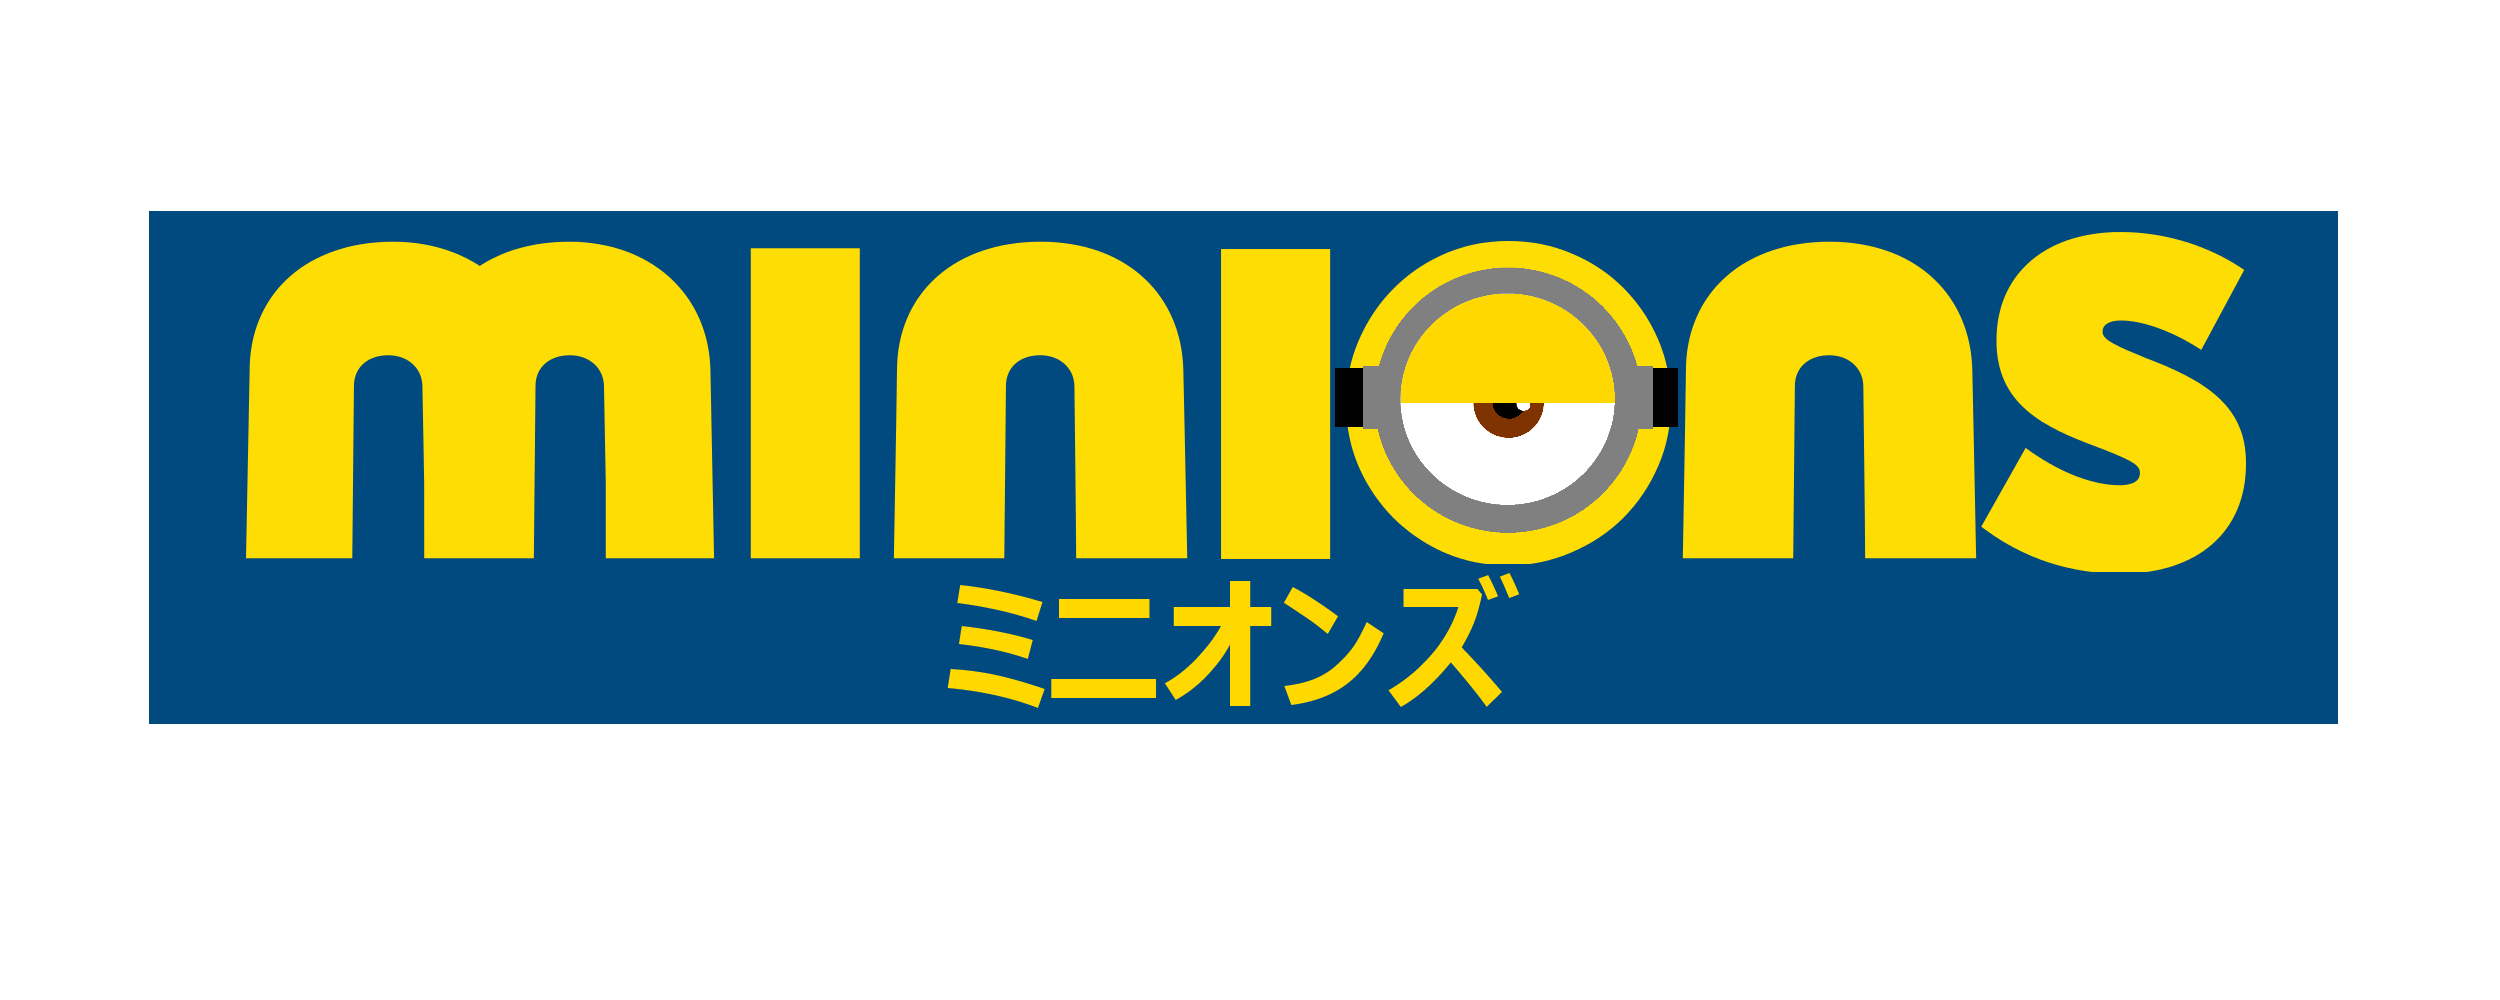 Logo Minions PNG Image High Quality PNG Image